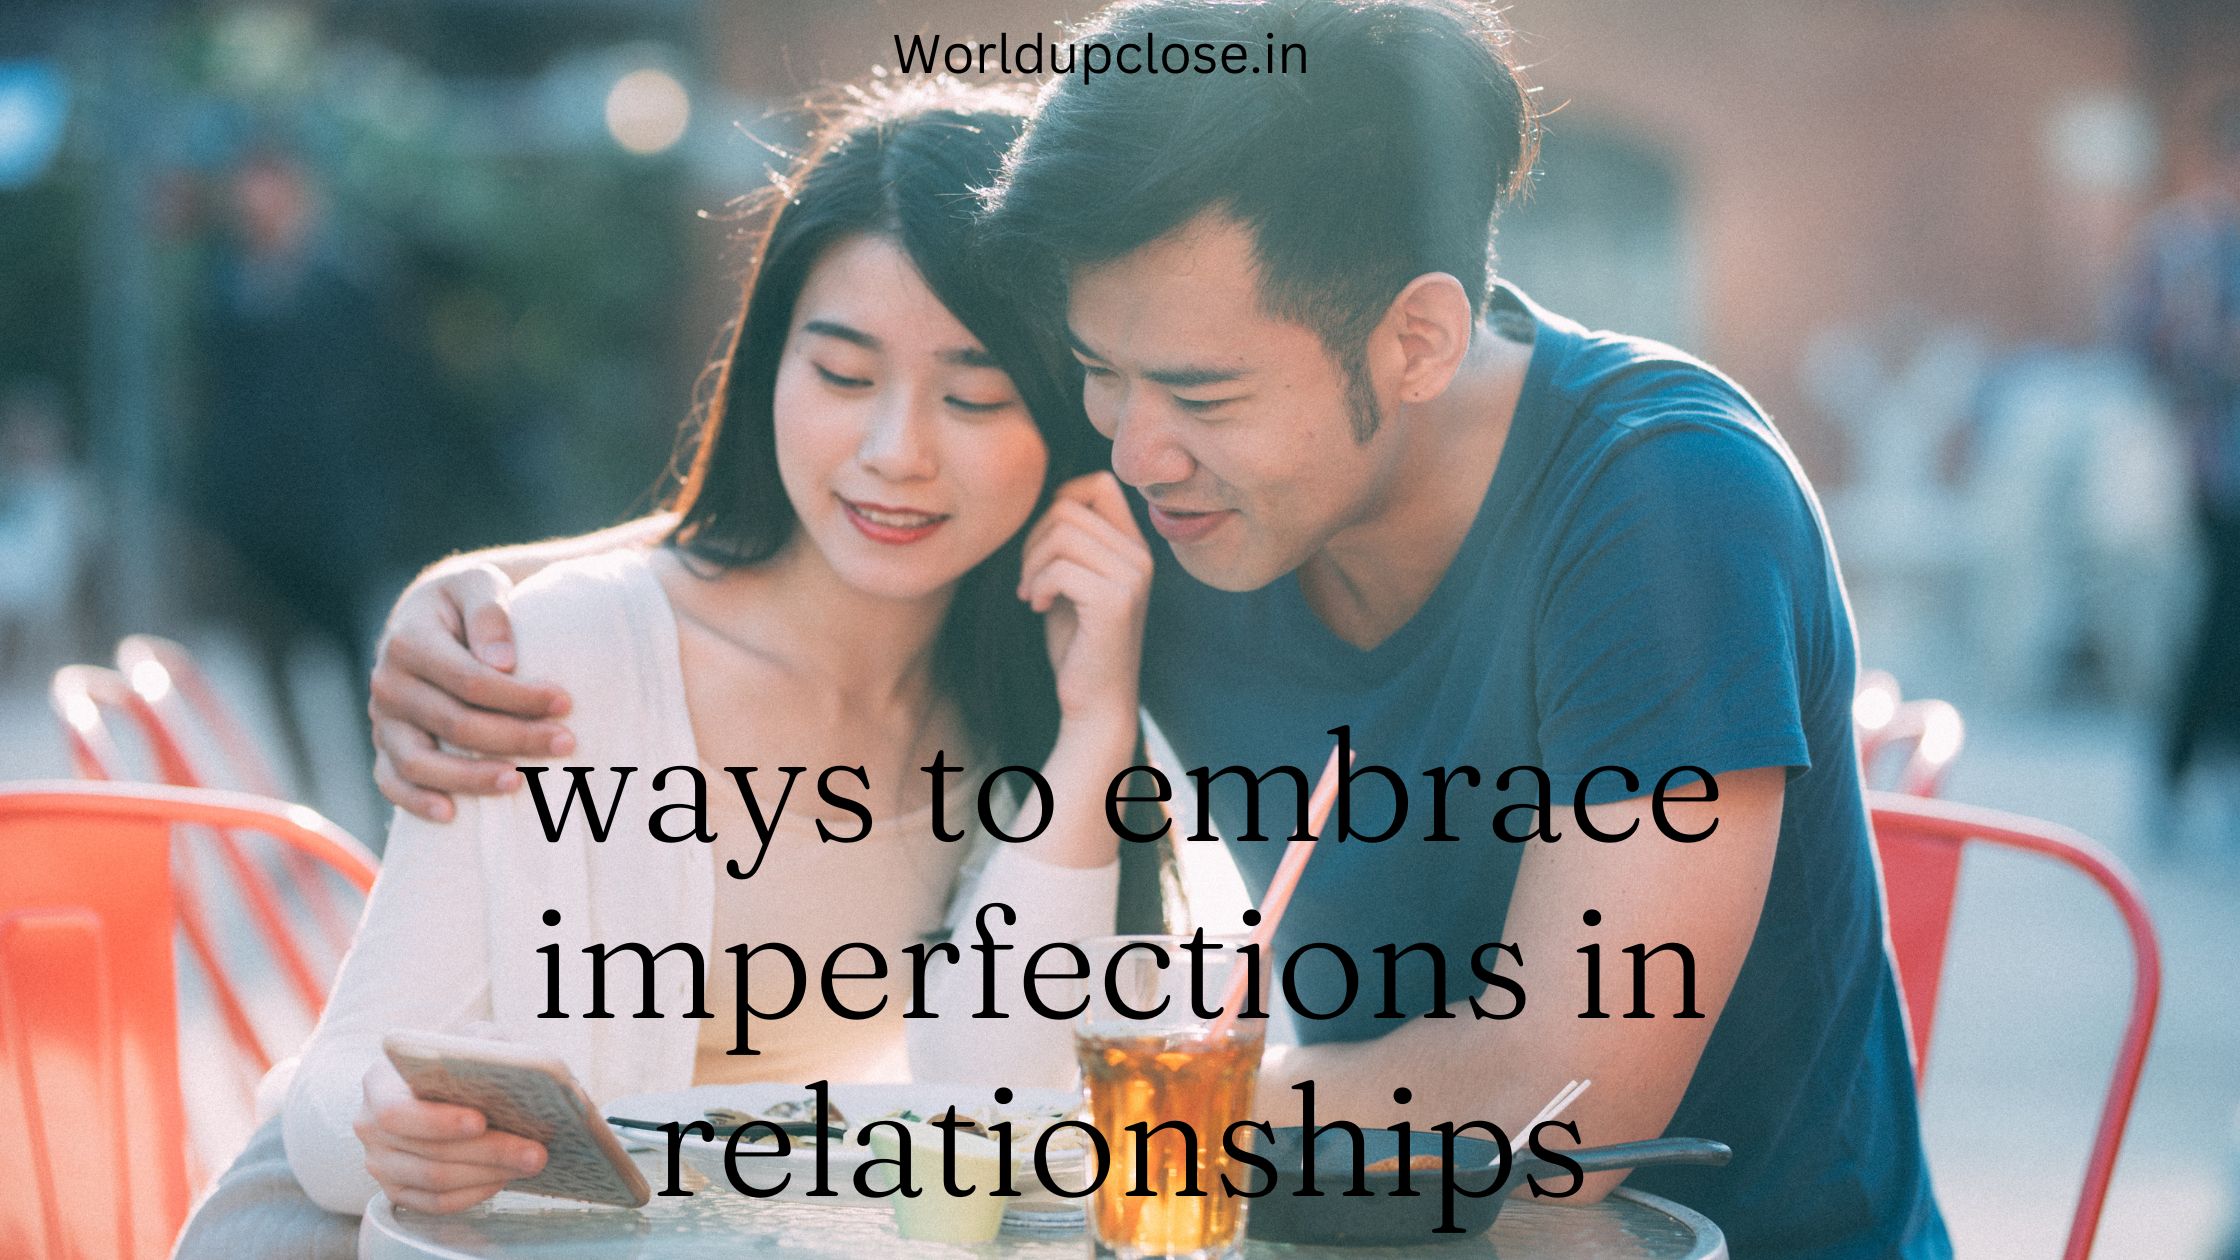 12 Ways to Embrace Imperfections in Relationships 4